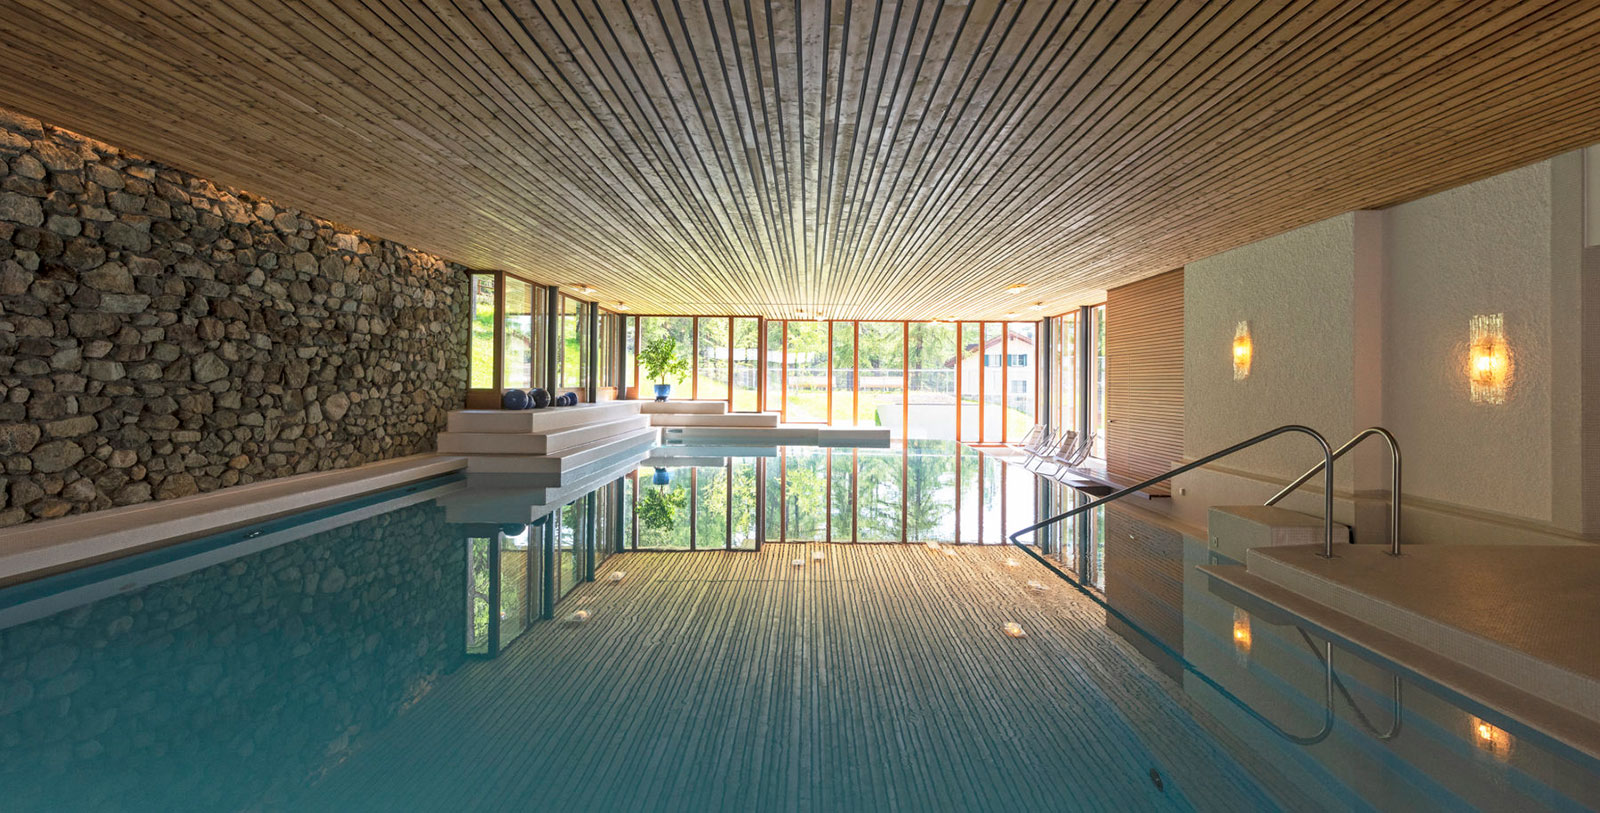 Experience the stunning Waldhaus Spa with its sauna, steam baths, and pools.